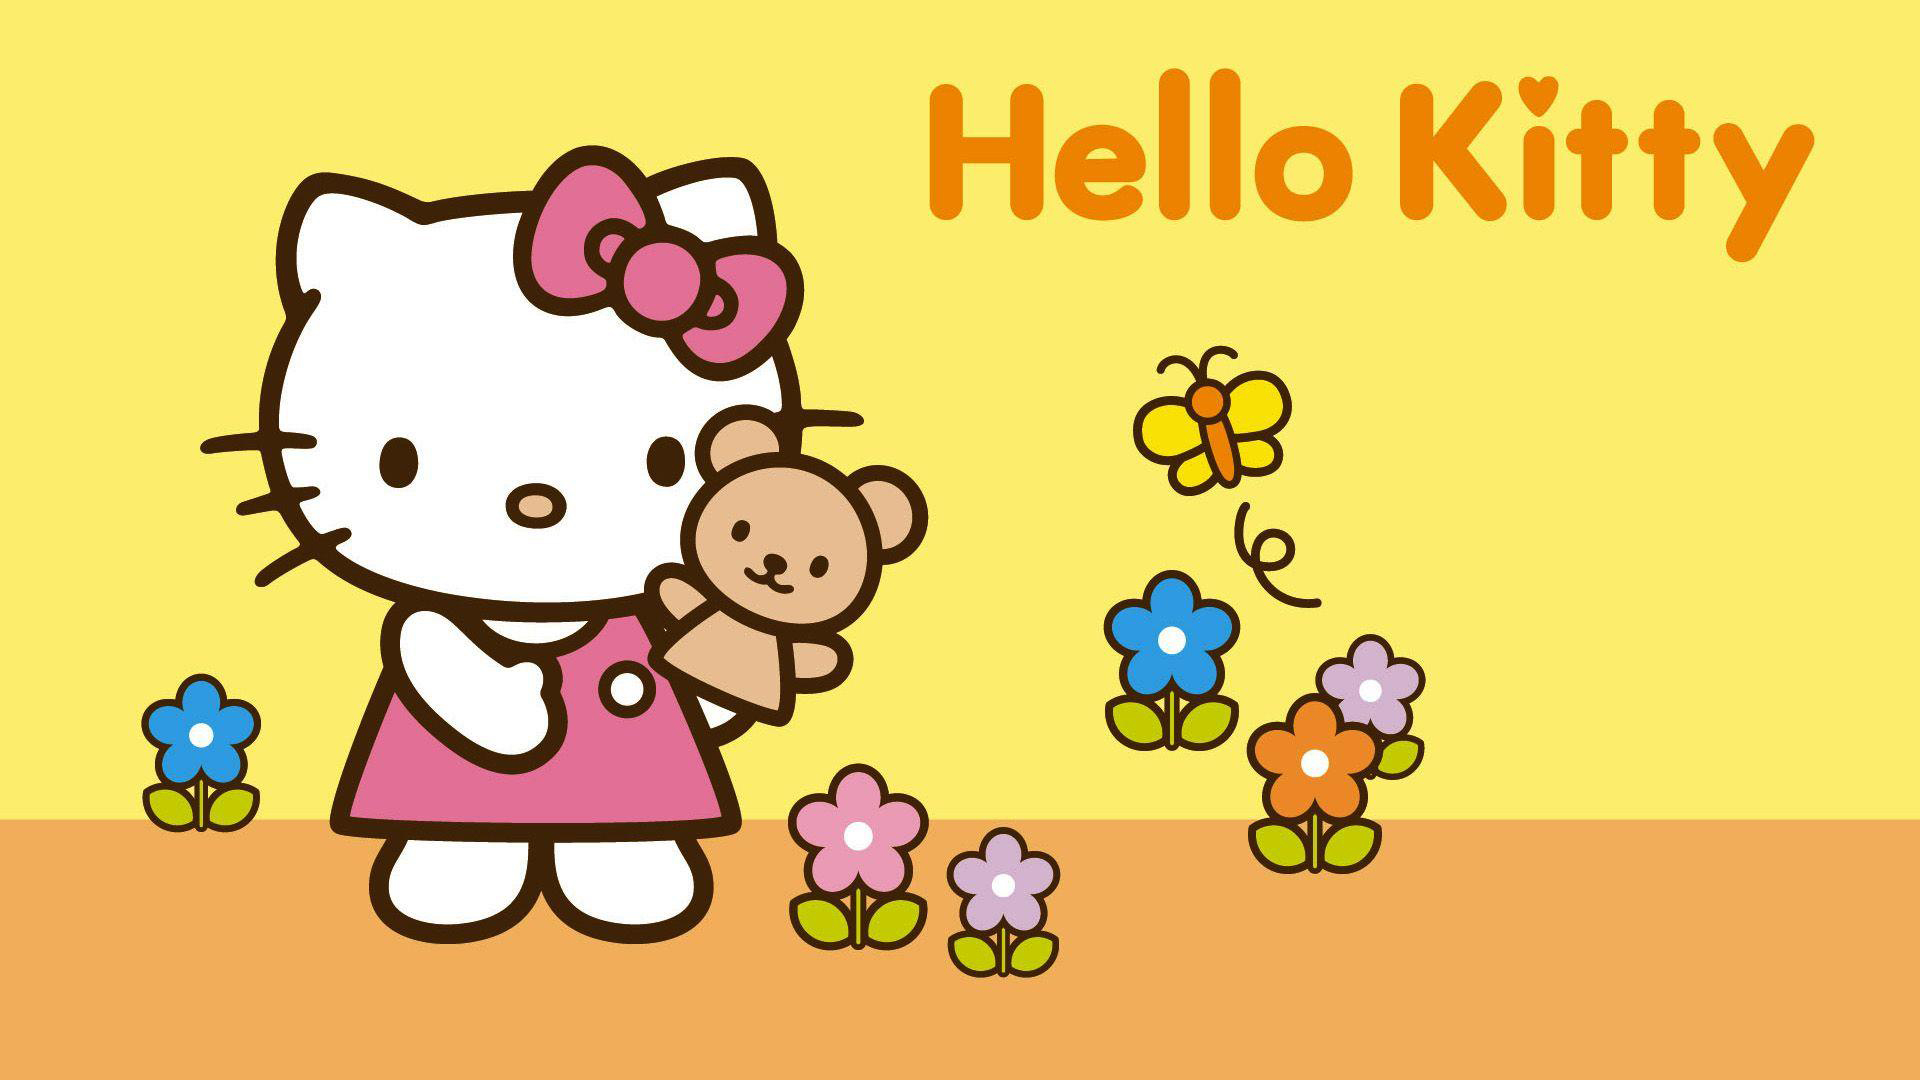 Hello Kitty With Teddy Toy And Flowers In Yellow Wallpaper 2K Hello Kitty